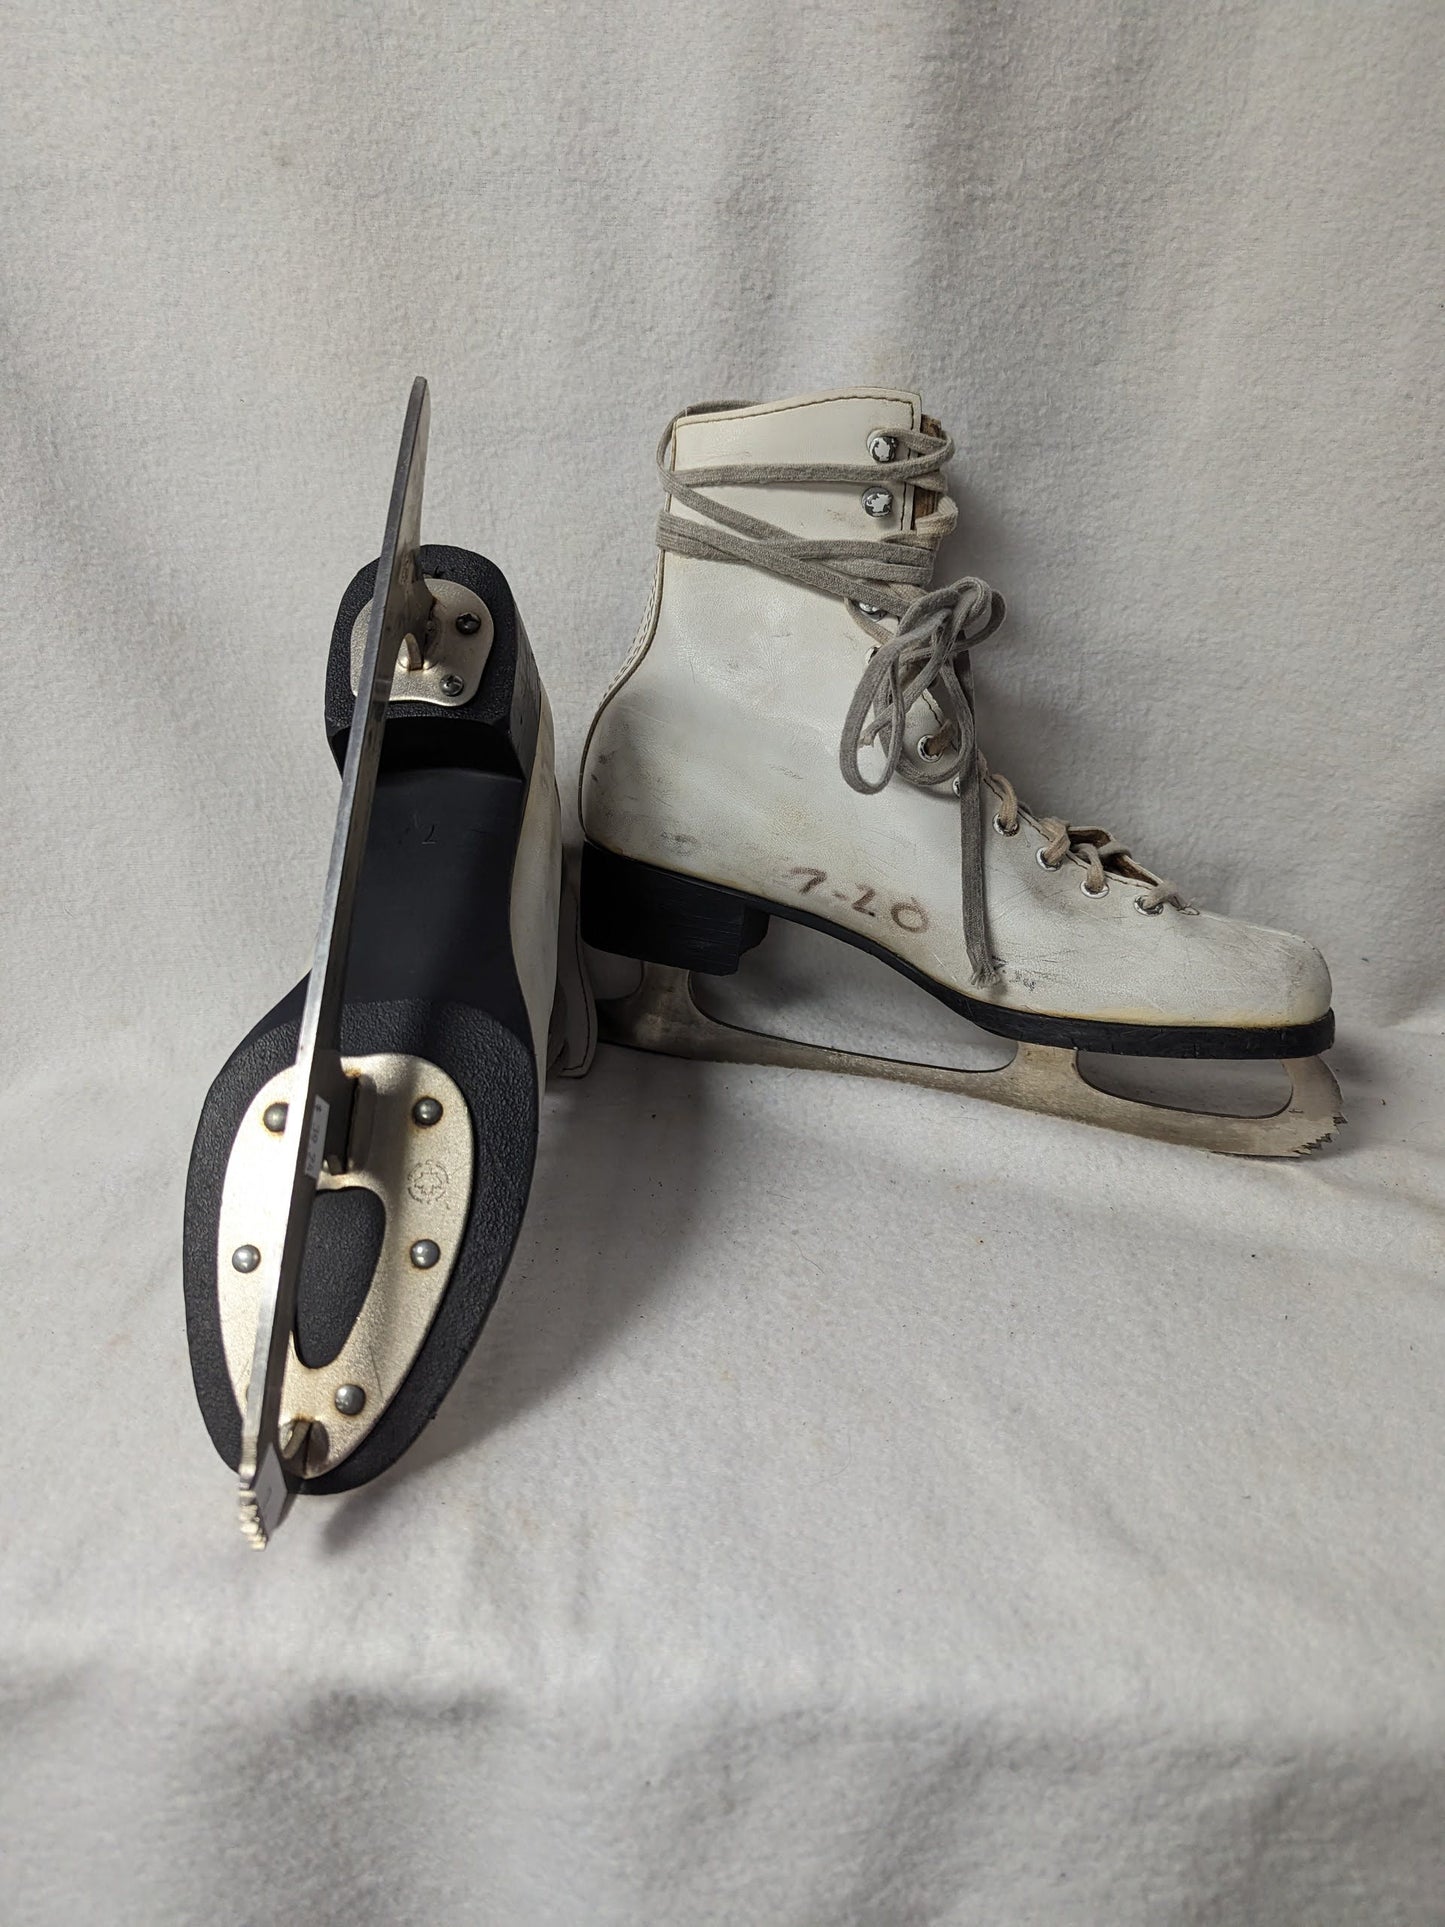 Lake Placid Figure Ice Skates Size 7 Color White Condition Used